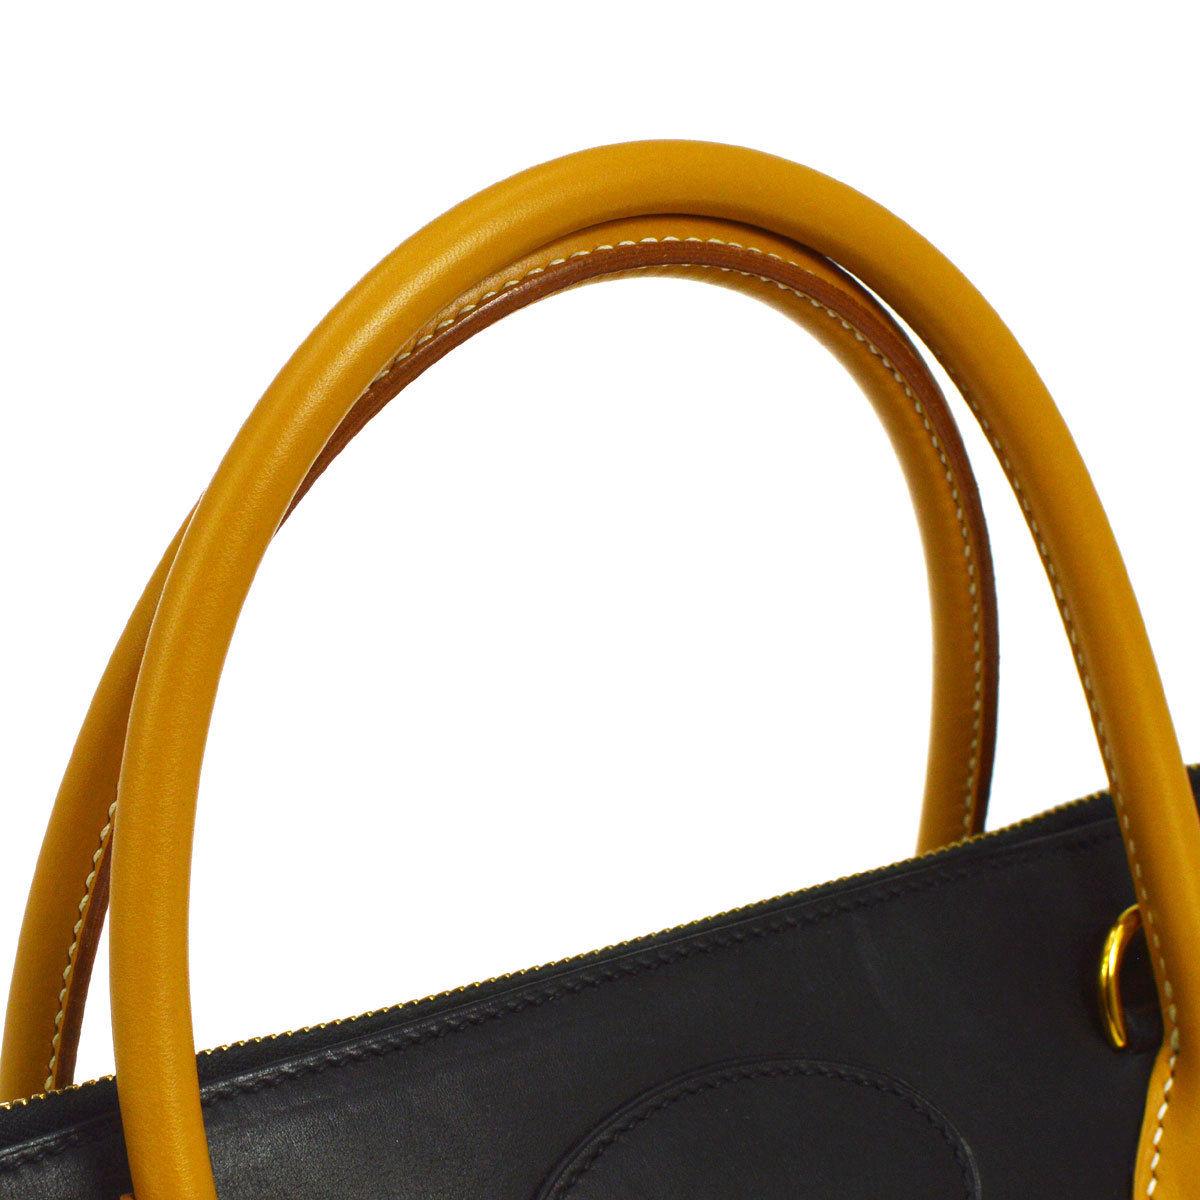 Hermes Two-Tone Black Cognac Leather Gold Top Handle Satchel Travel Weekend Tote

Leather
Gold tone hardware
Date code present
Made in France
Handle drop 4